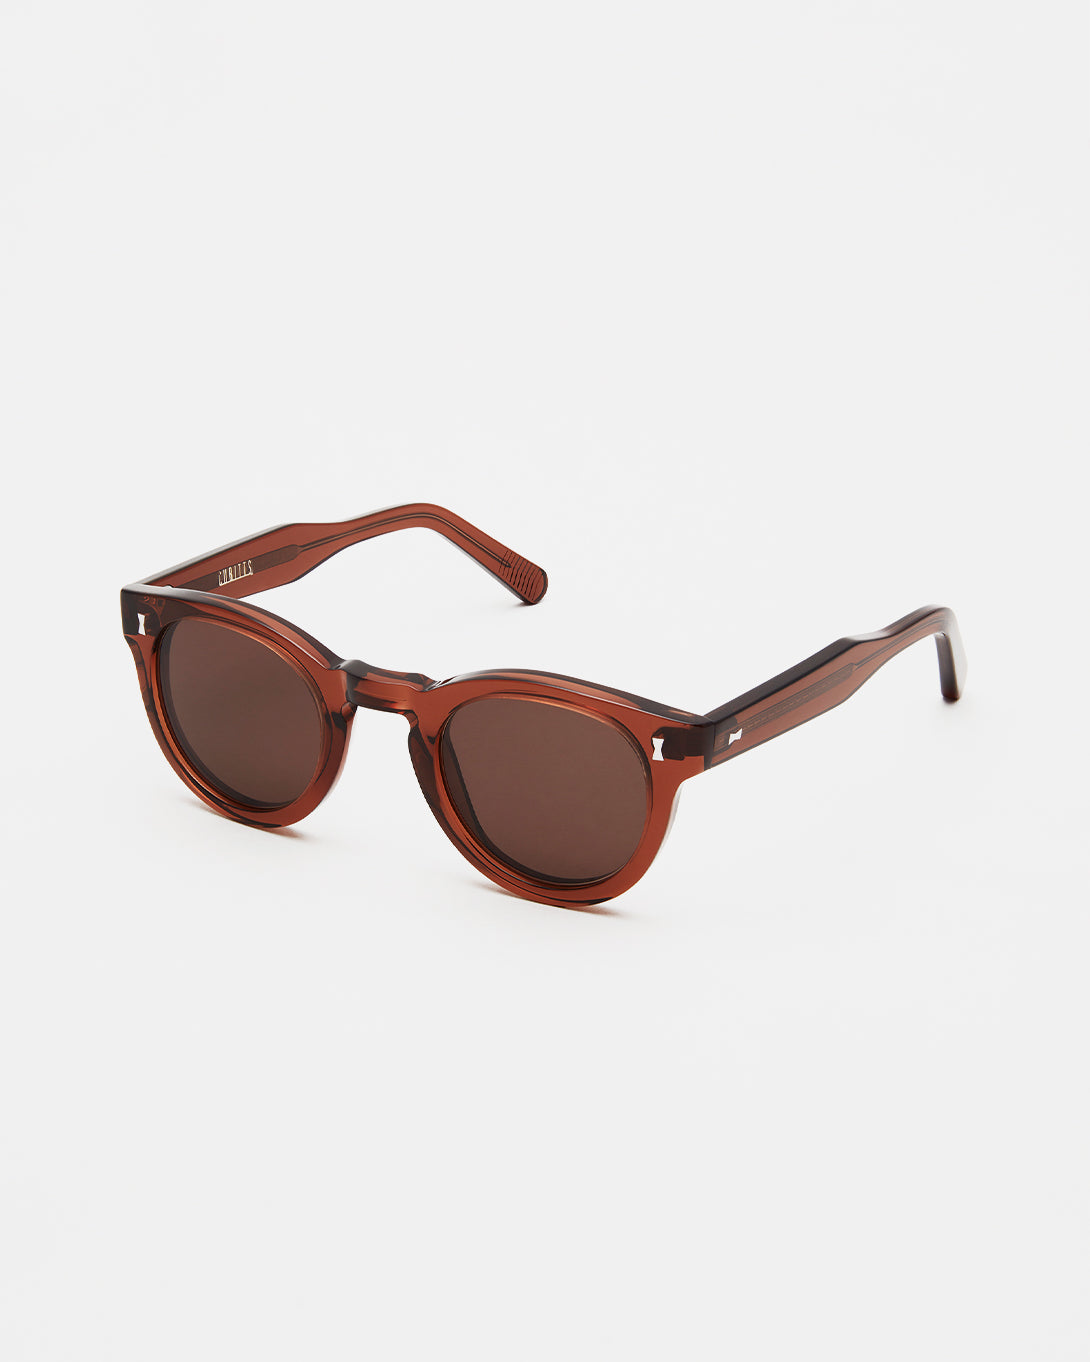 Coconut Herbrand Bold Cubitts Sunglasses